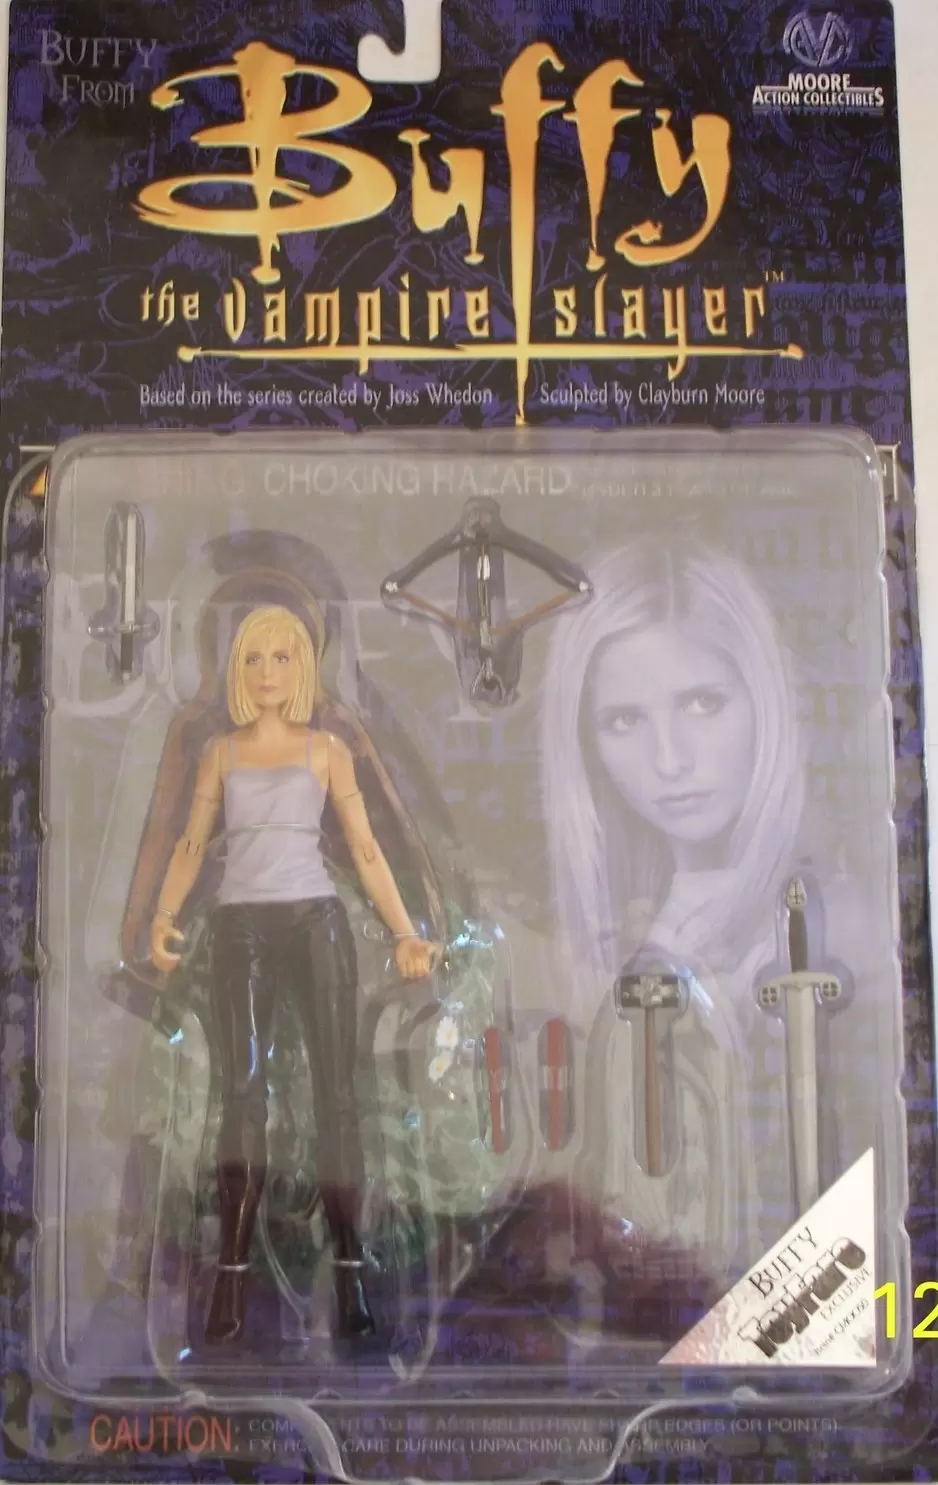 Moore Action Collectibles - Buffy Toyfare Exclusive